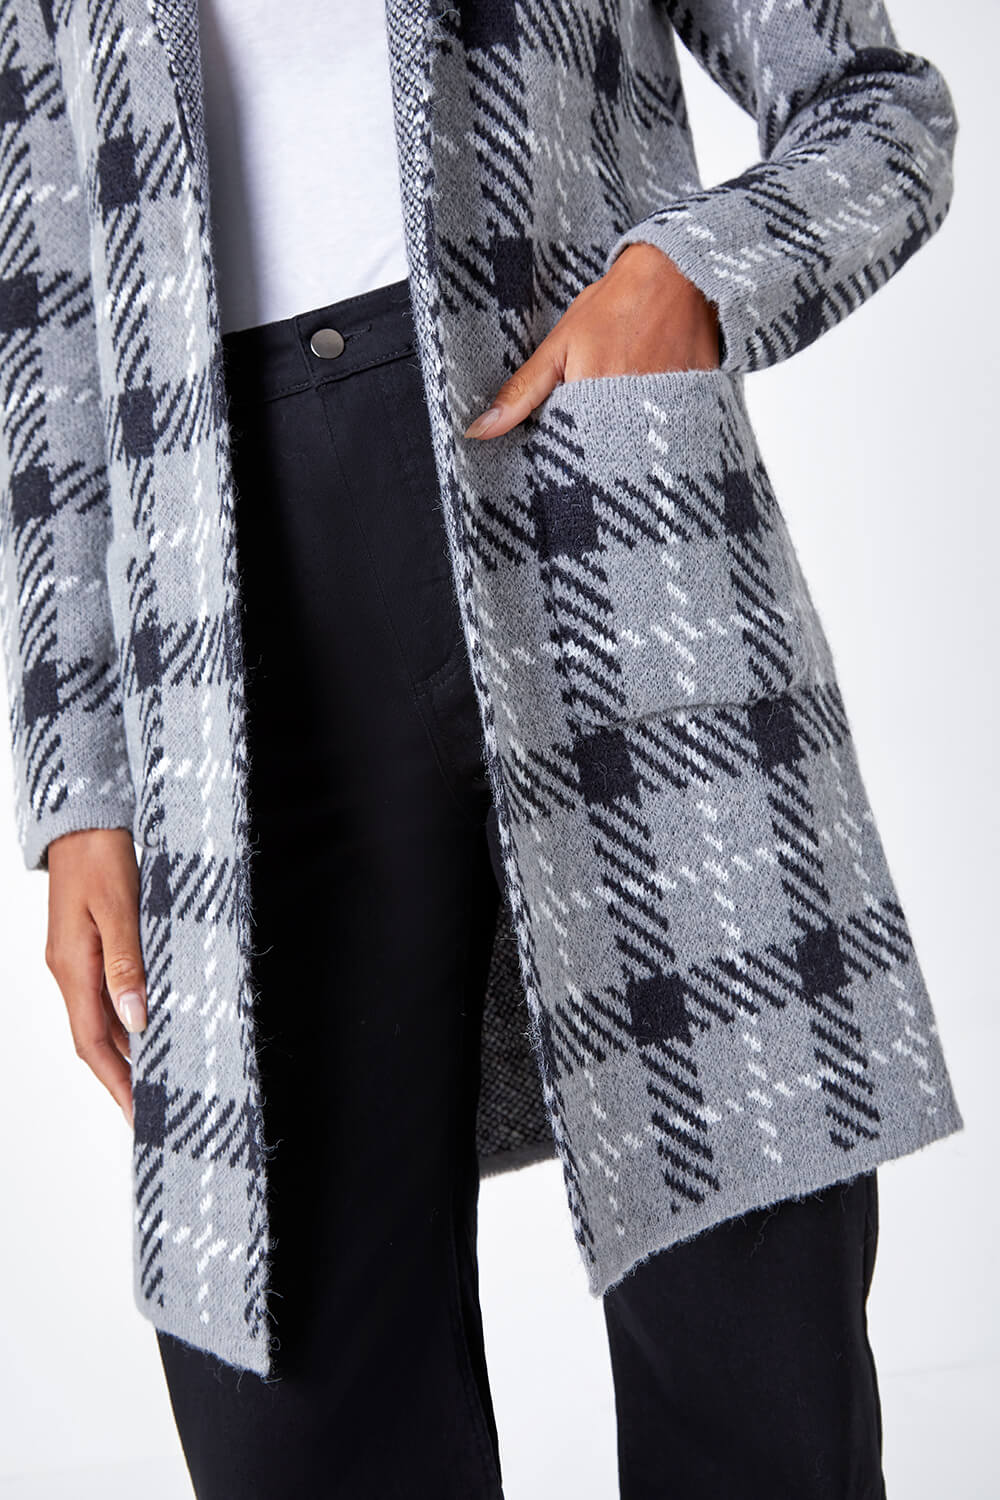 Grey Check Longline Hooded Cardigan, Image 5 of 7